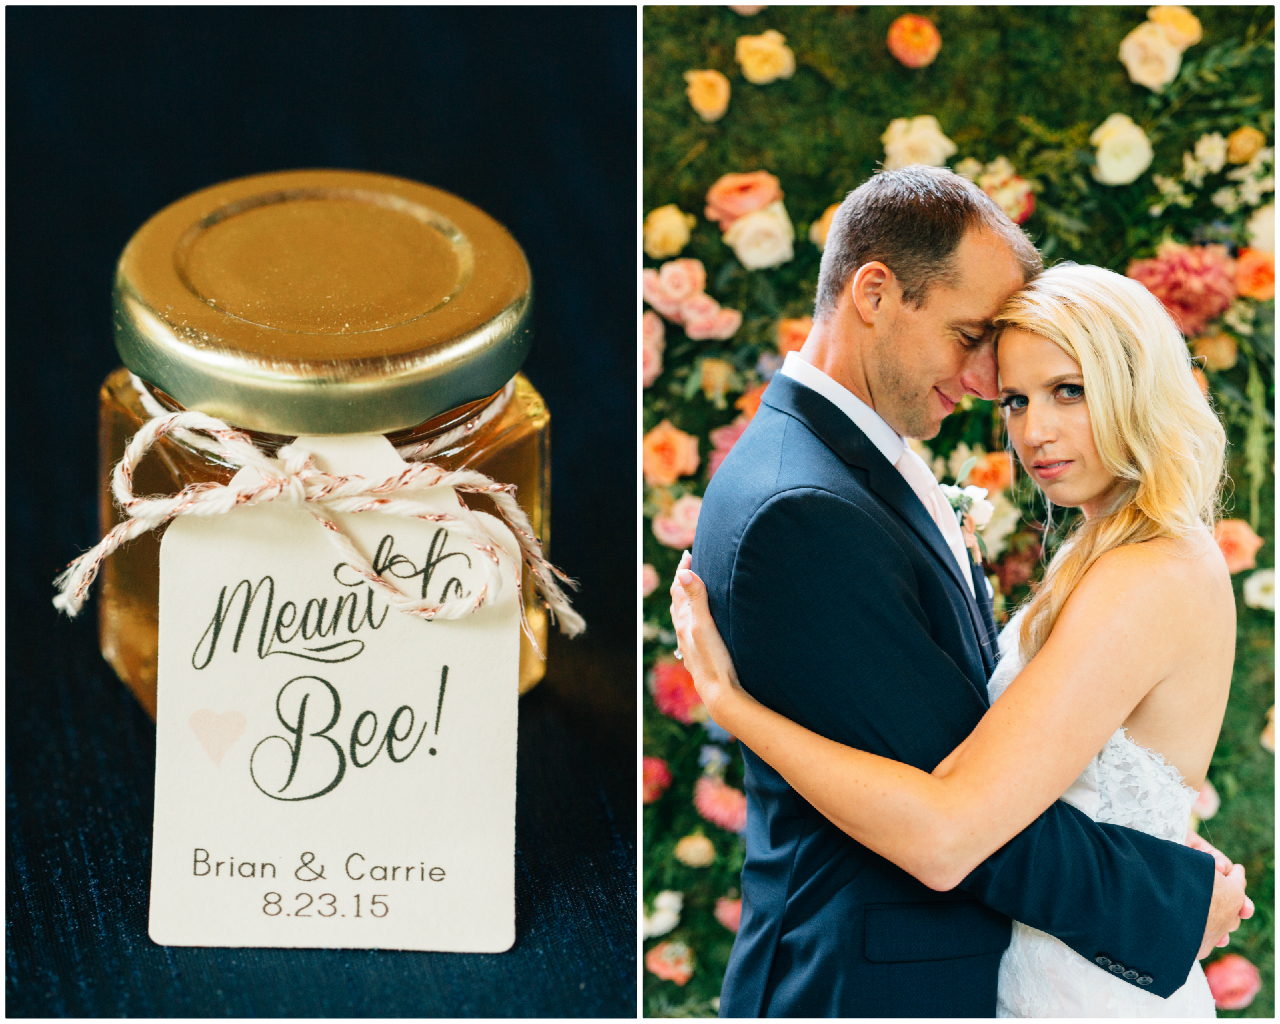 Wedding Favors | The Day's Design | Jamie and Sarah Photography